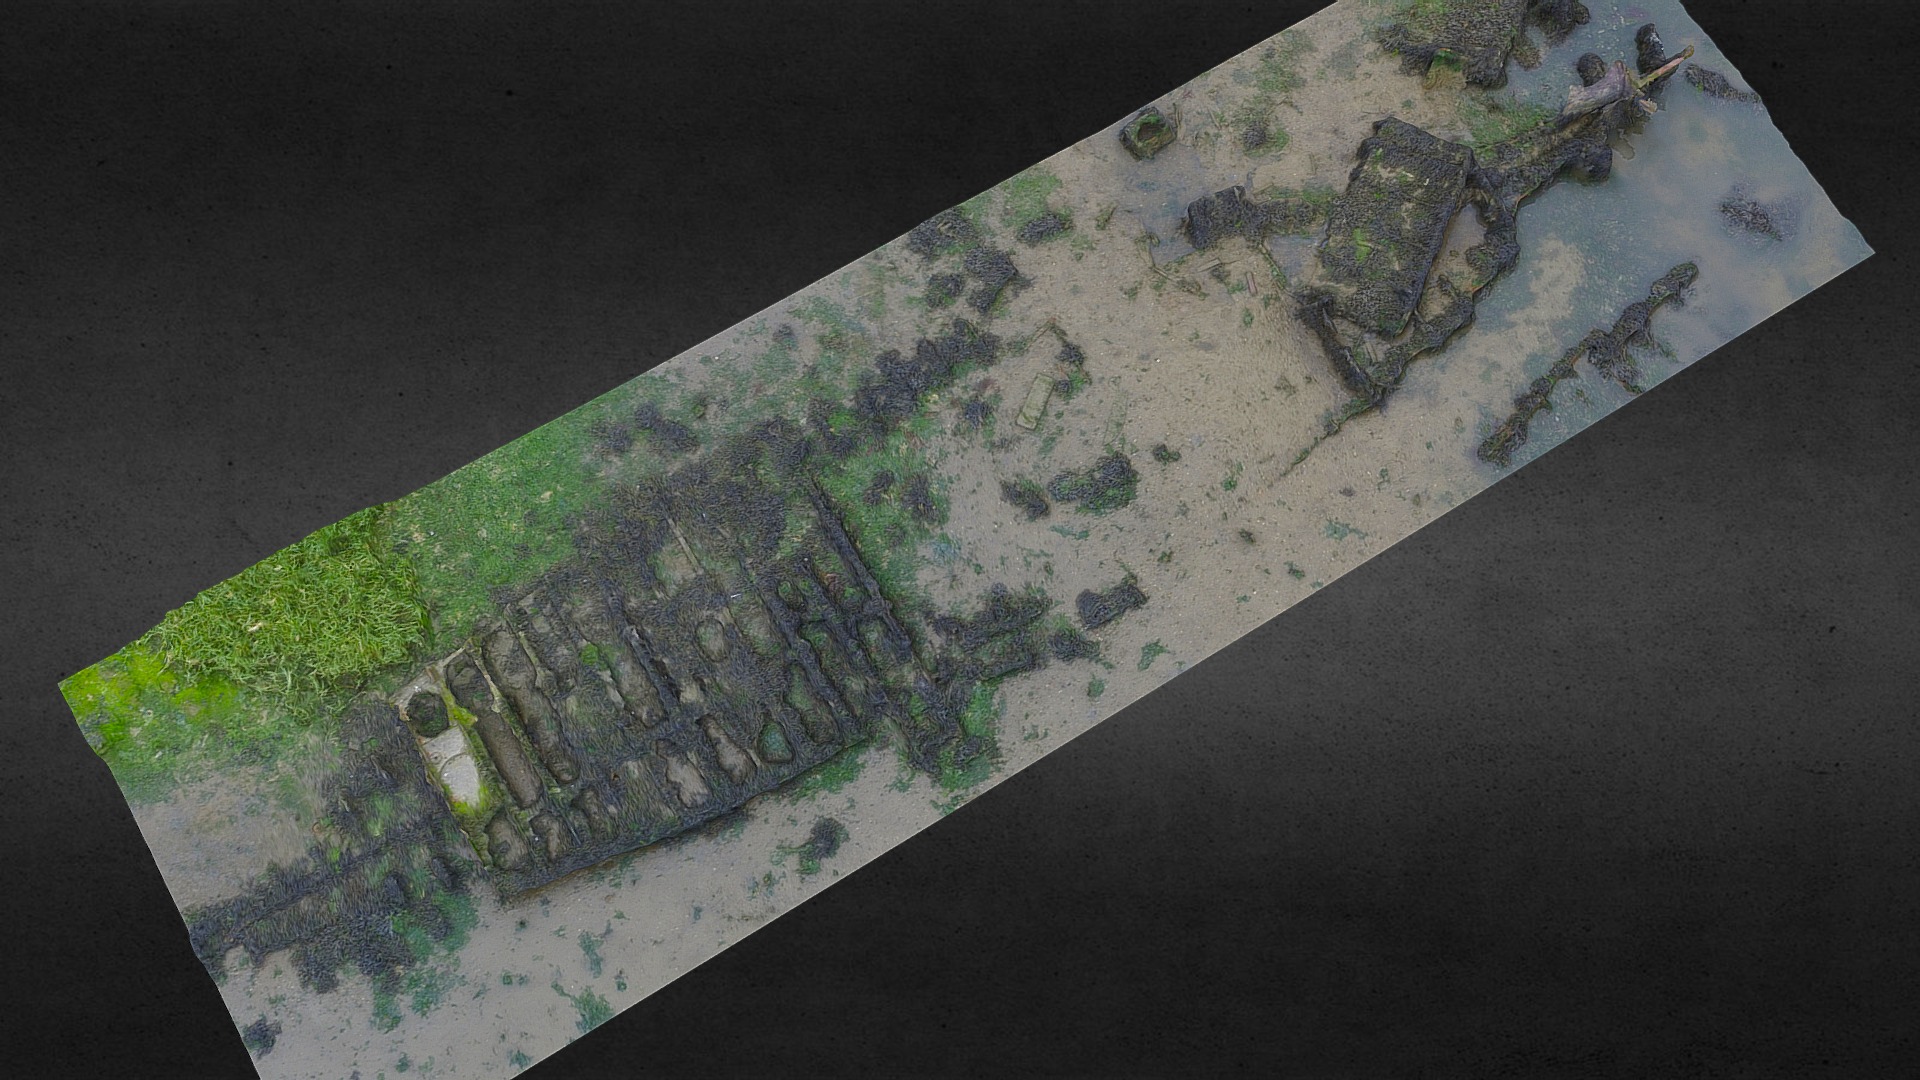 3D model Wreck 1, Poole - This is a 3D model of the Wreck 1, Poole. The 3D model is about a stone wall with a hole in it.